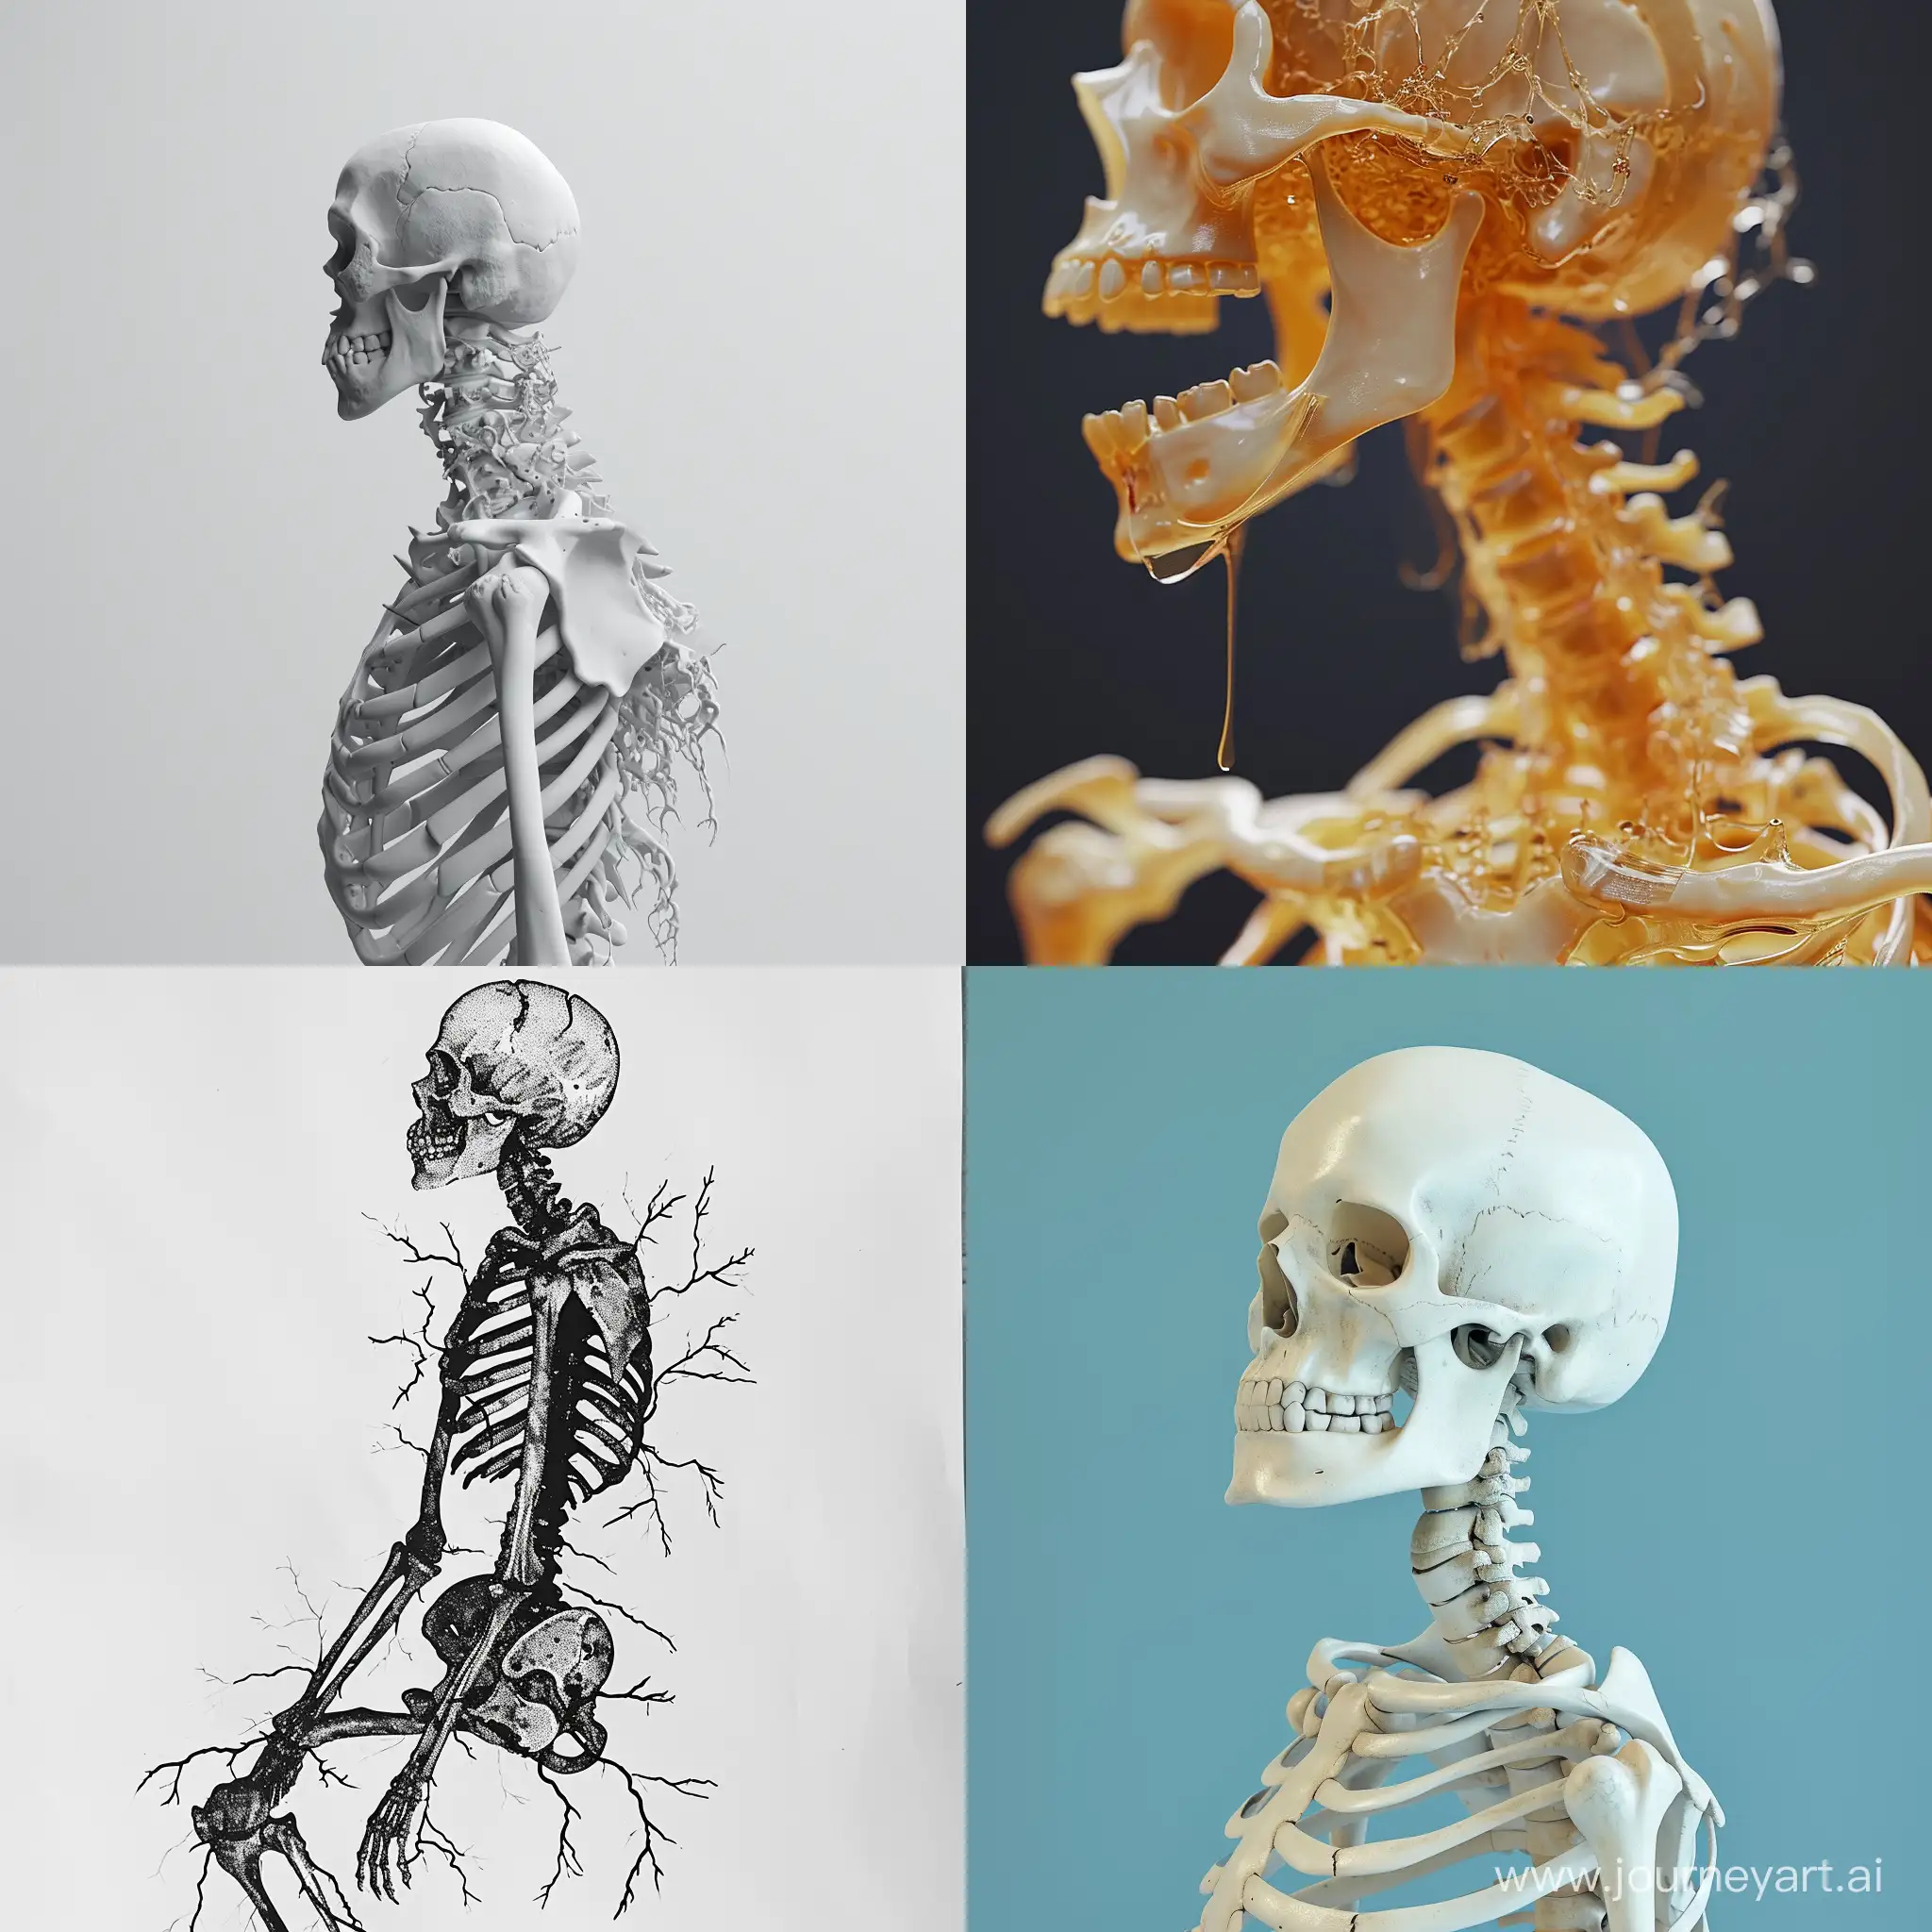 Ethereal-Elegance-Intricate-Skeleton-Art-with-6-Vertices-in-a-11-Aspect-Ratio